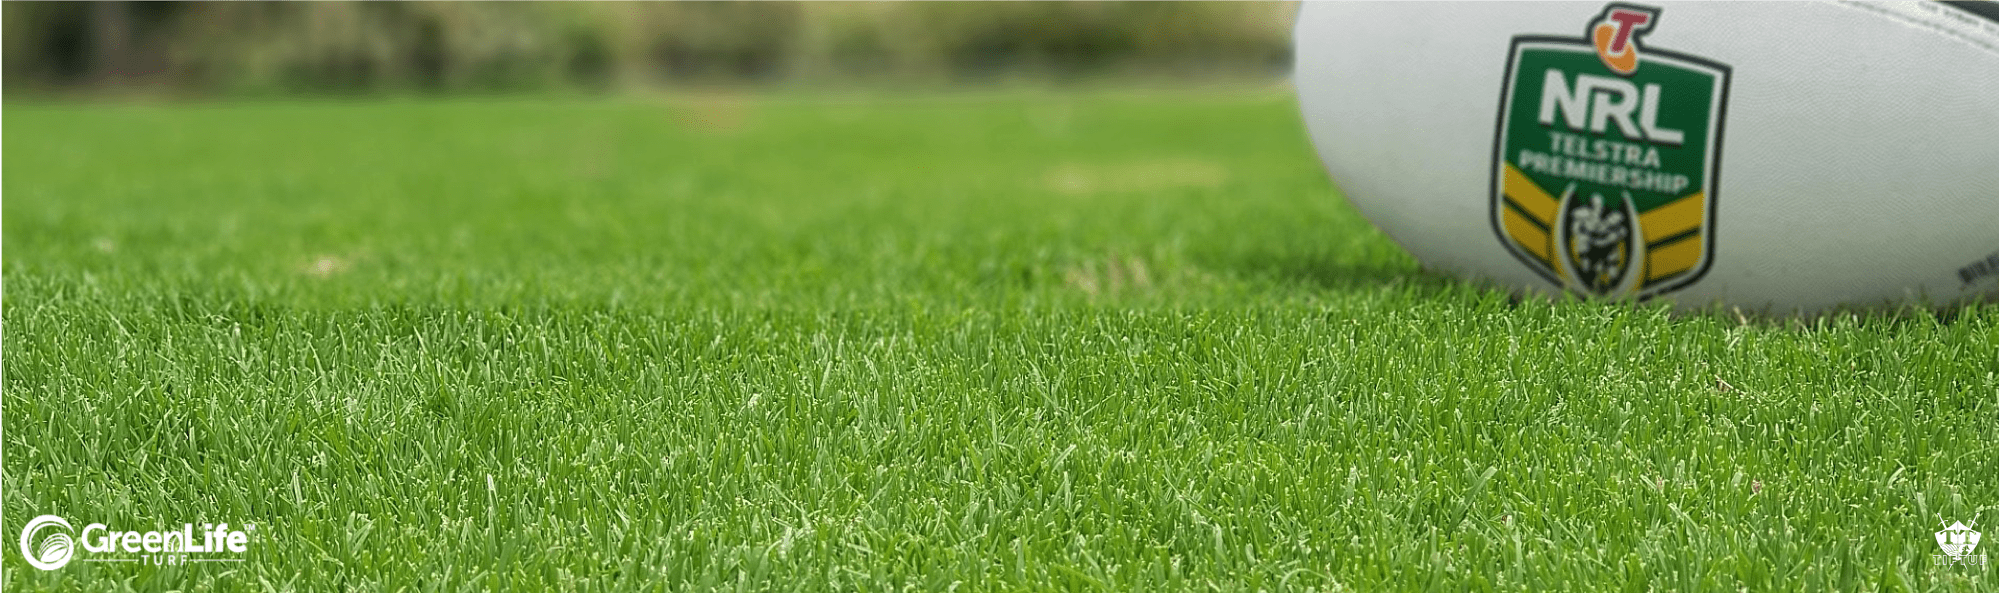 Turf for Busy Sports Fields | TifTuf Bermuda Couch